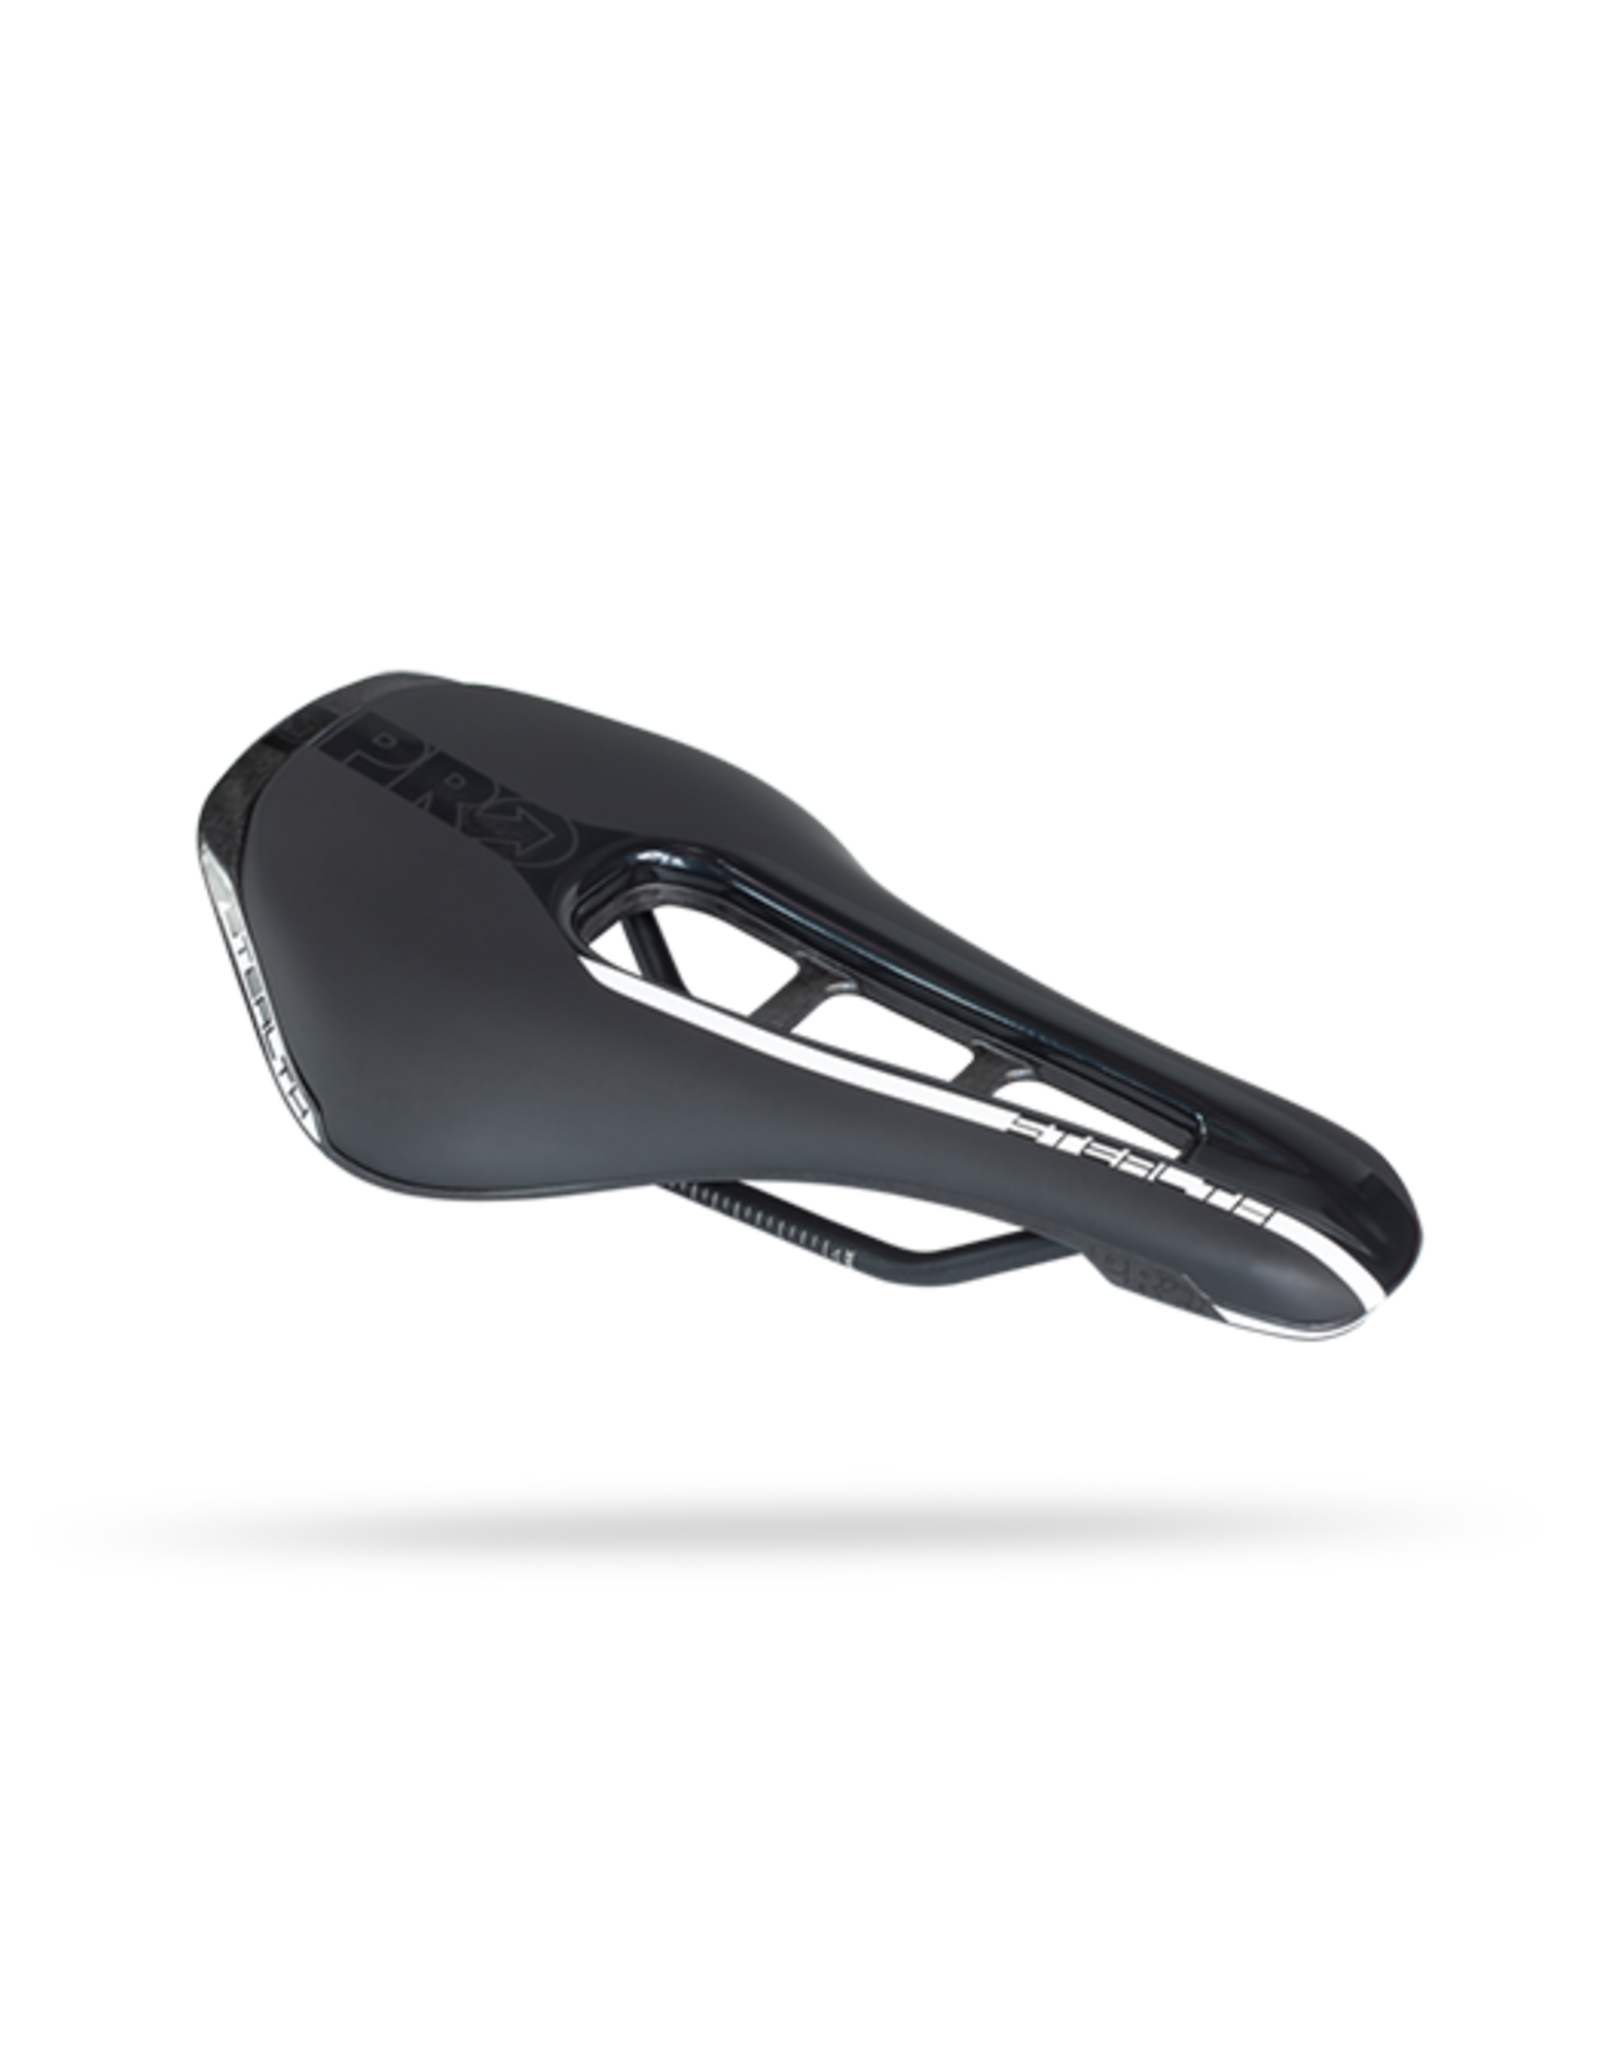 PRO PRO Stealth Saddle, Stainless